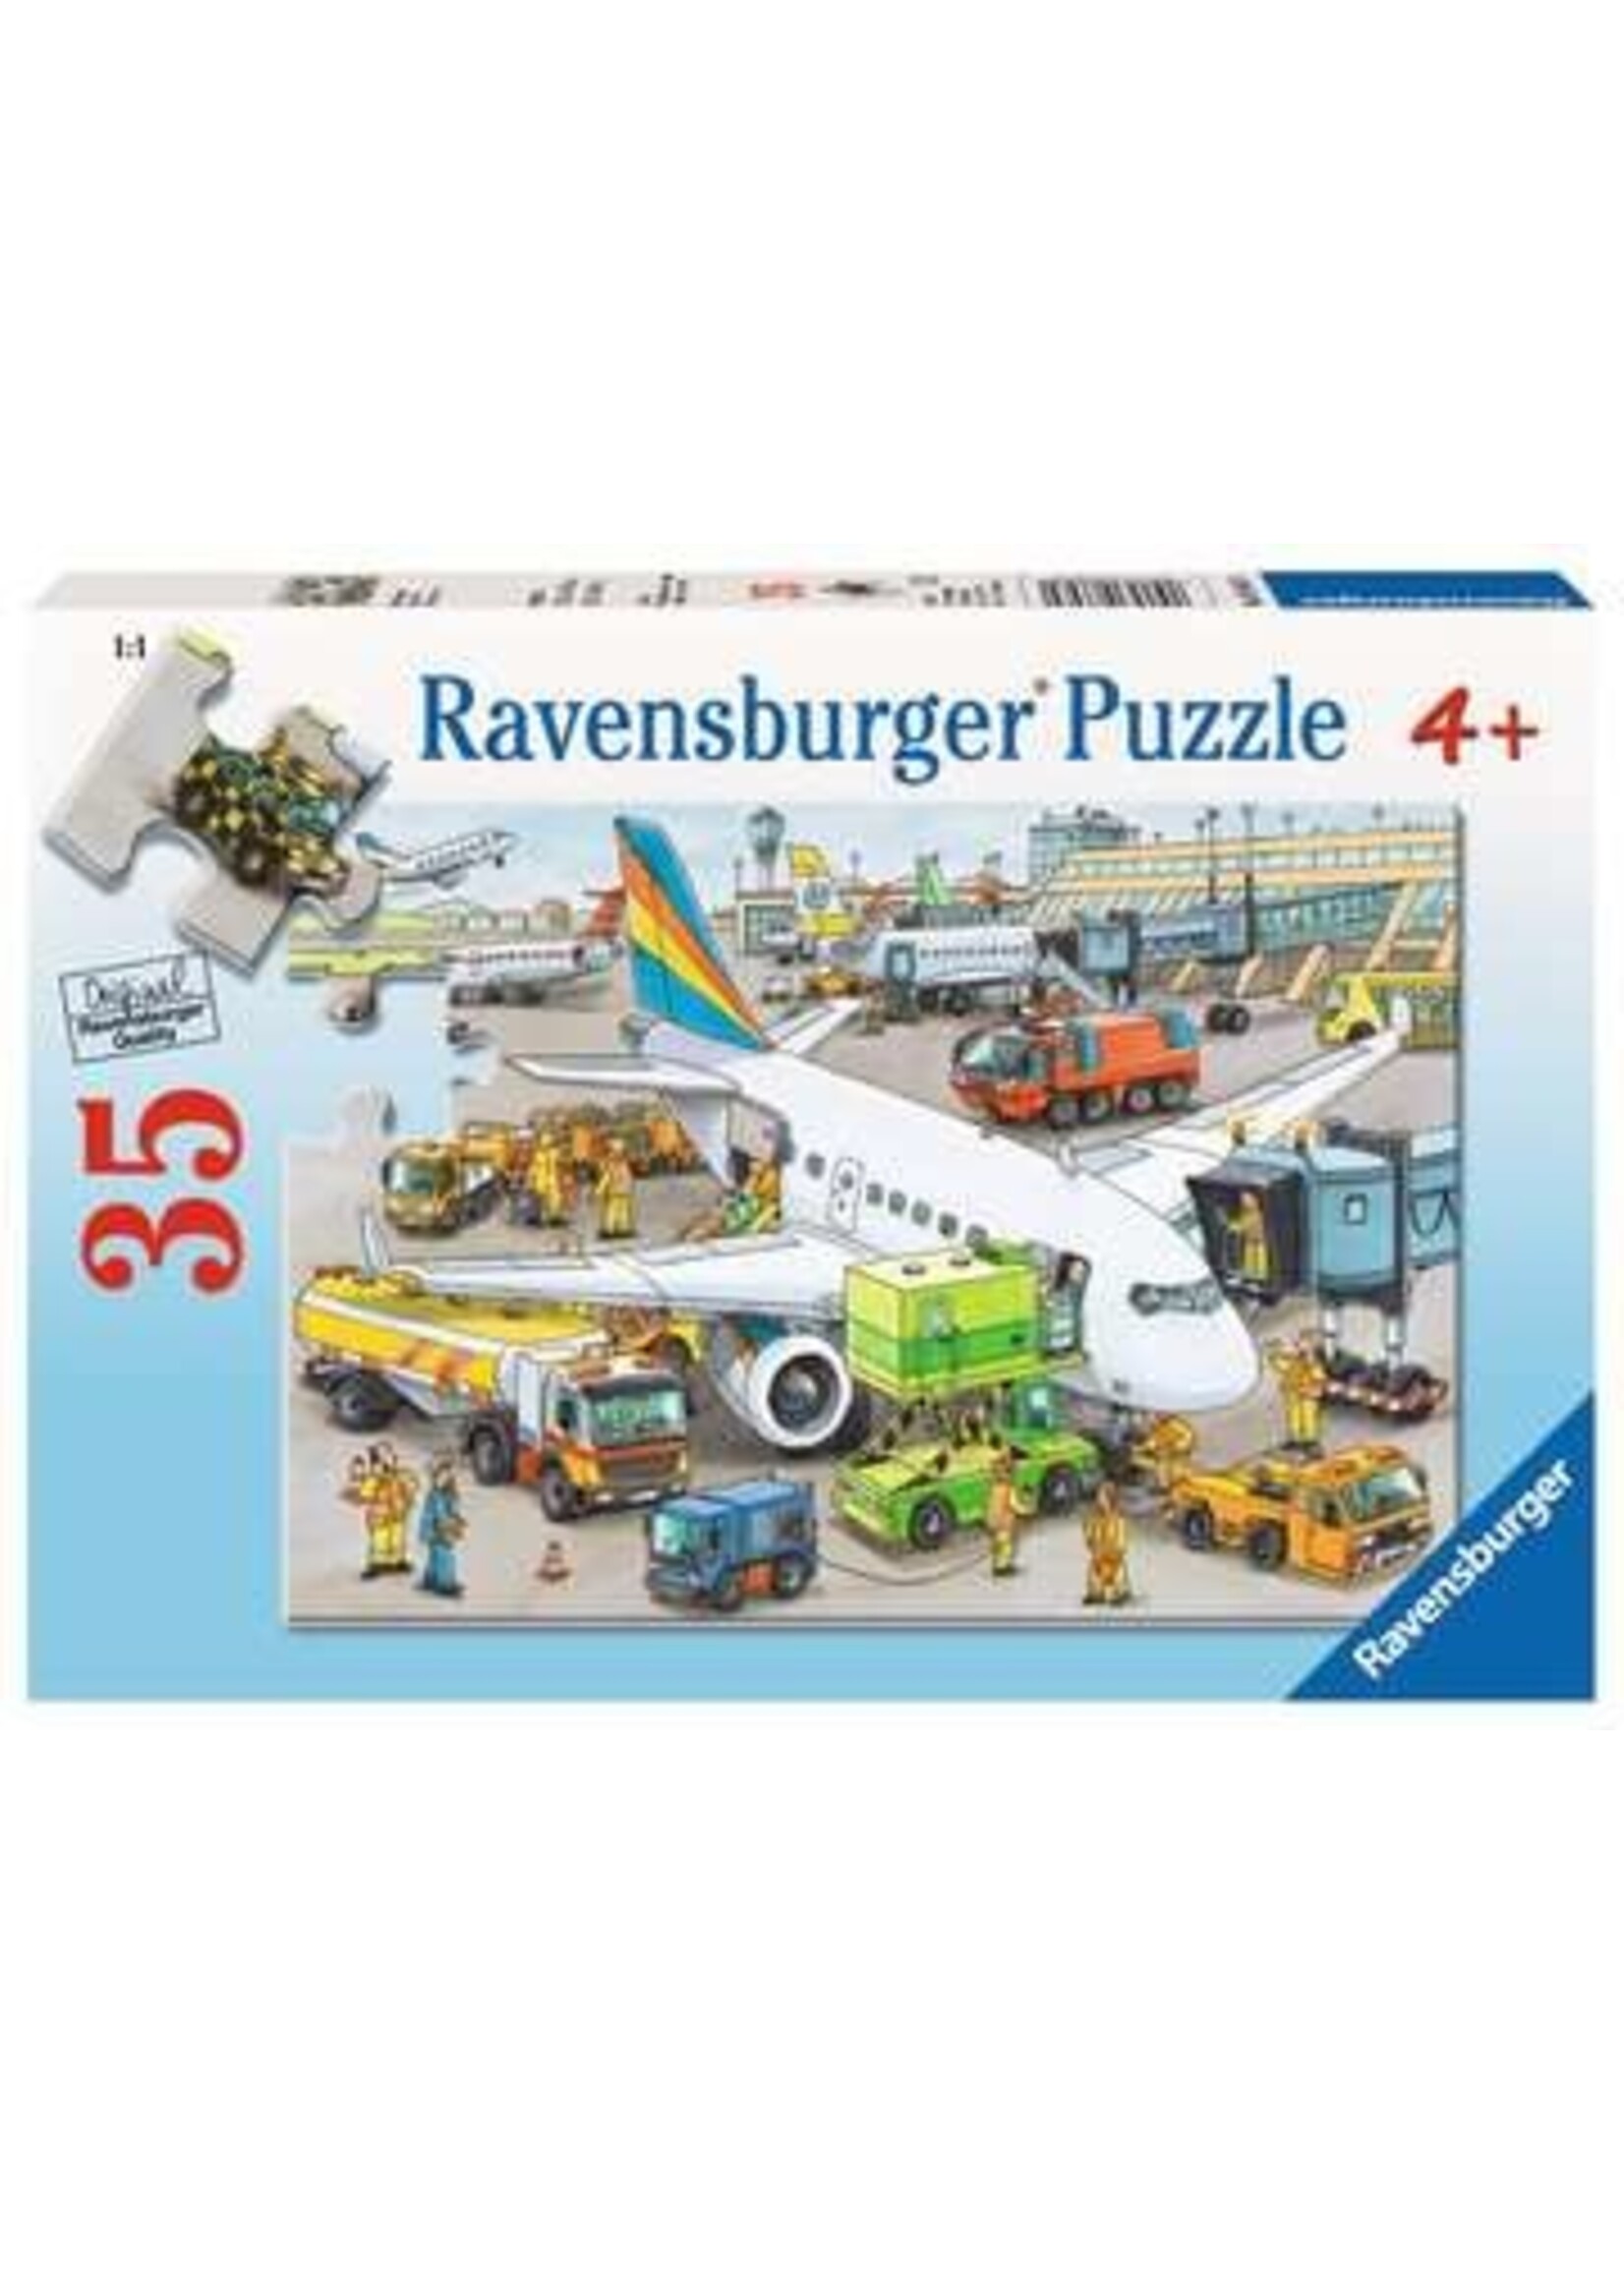 Ravensburger "Busy Airport" 35 Piece Puzzle